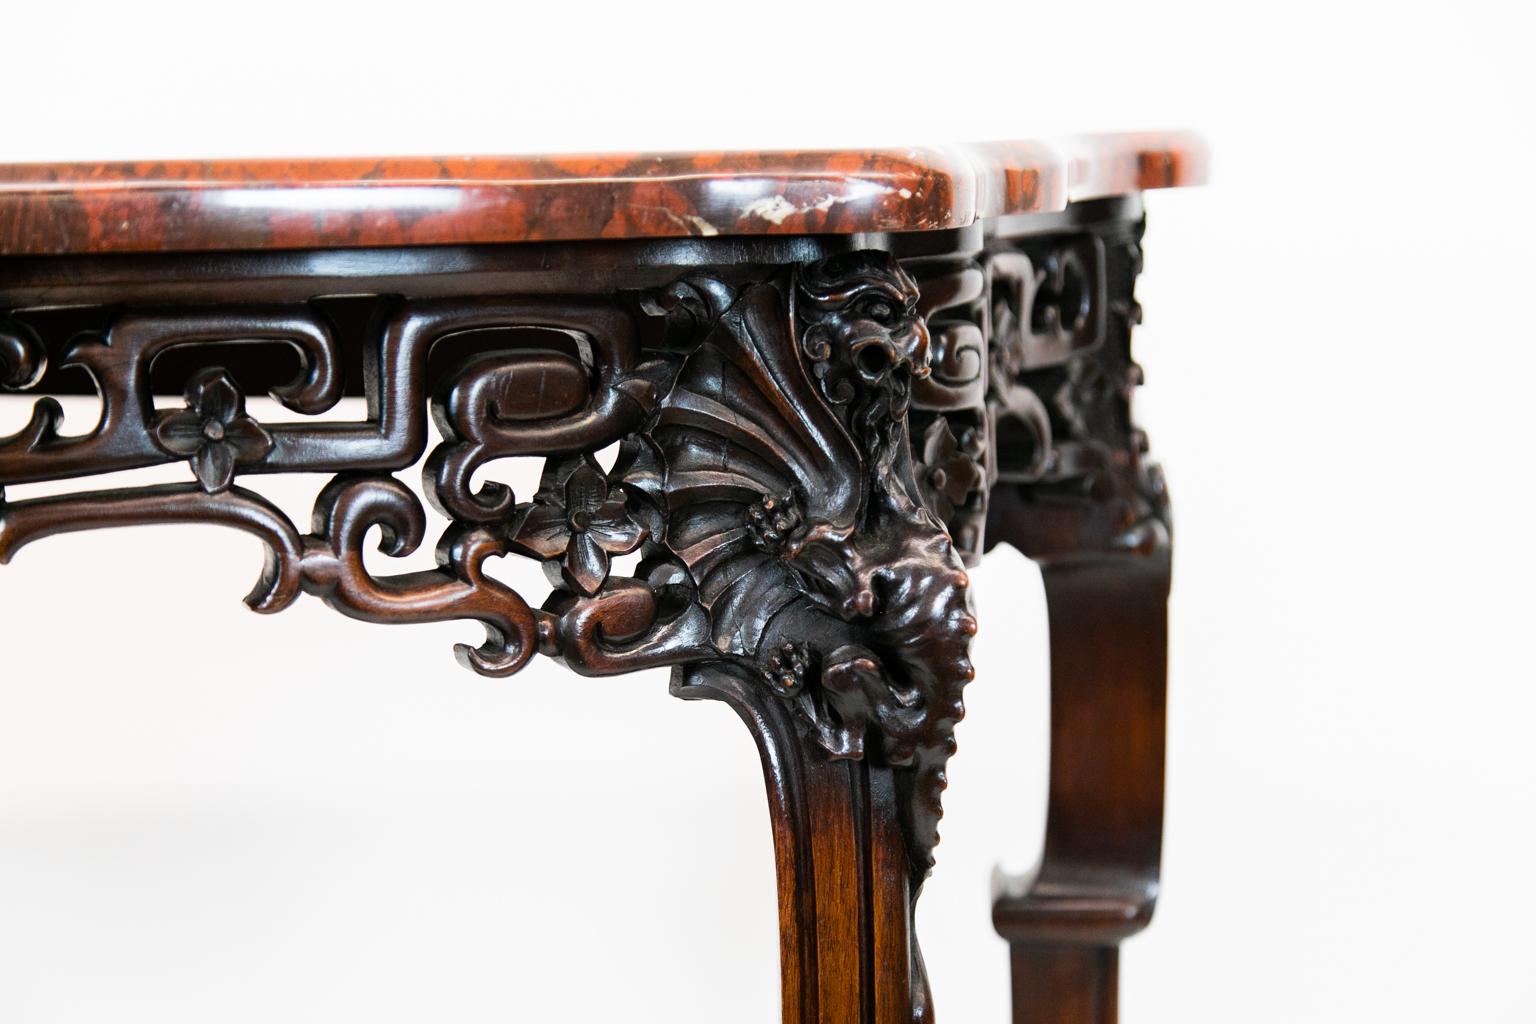 English carved marble-top console table has deep red marble with white figuring. The apron and sides are carved in a distinctive Chinese style but with English embellishments of carved masks. The lower section is joined with stretchers that join in